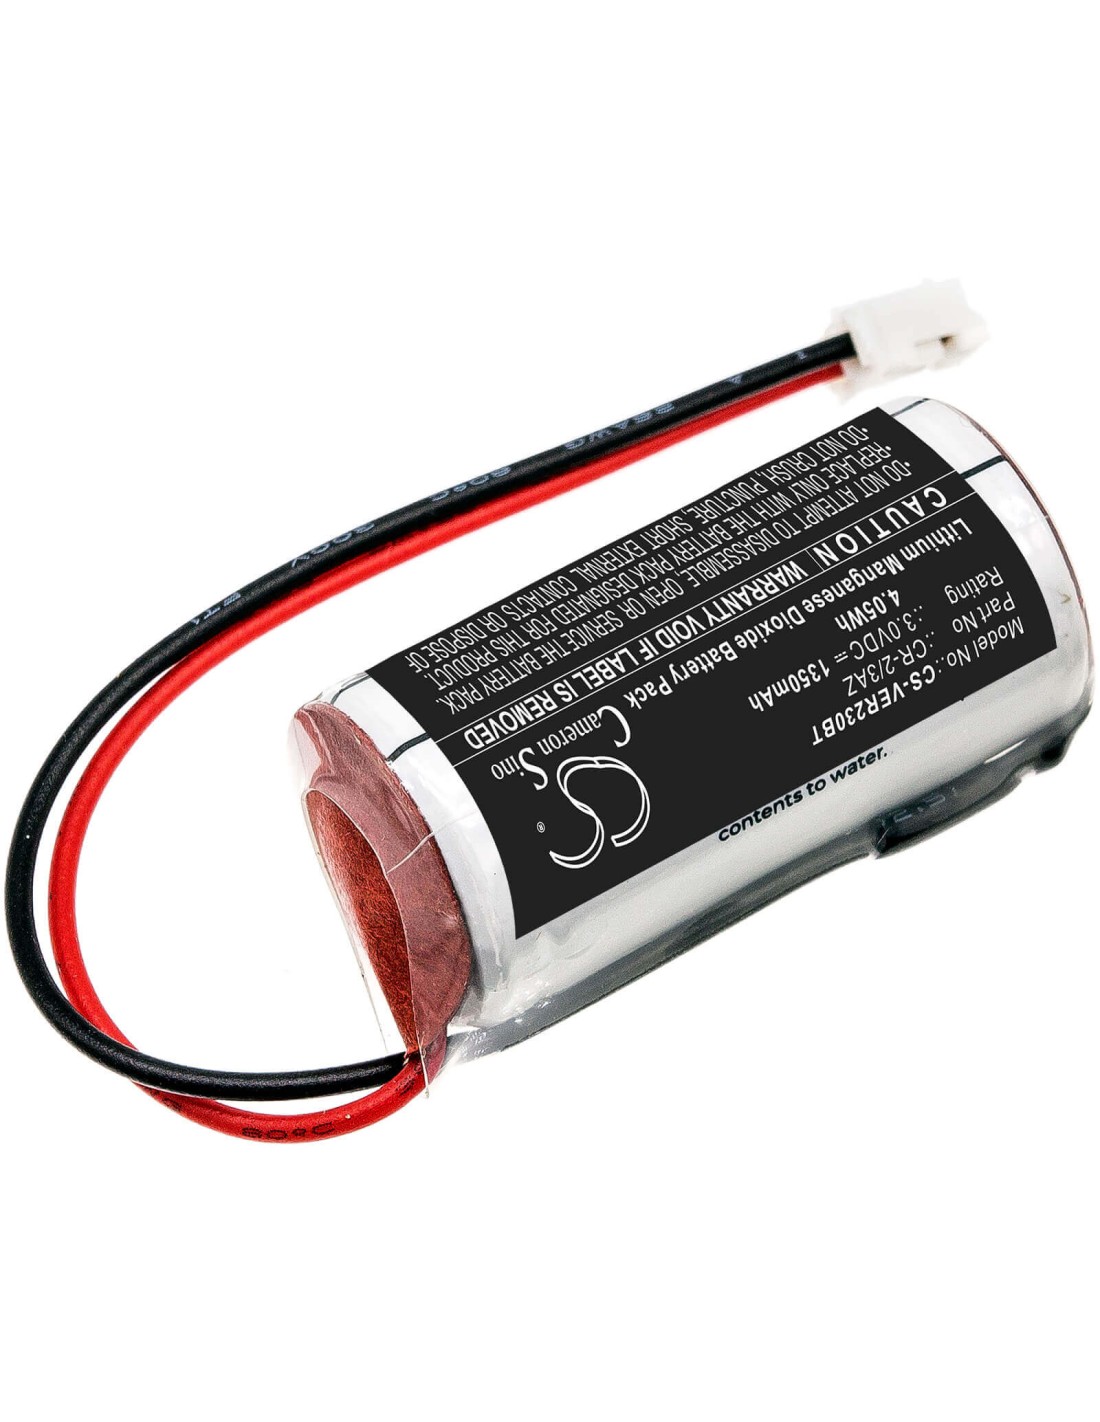 Battery for Dom, Eniq Guardian S 3.0V, 1350mAh - 4.05Wh